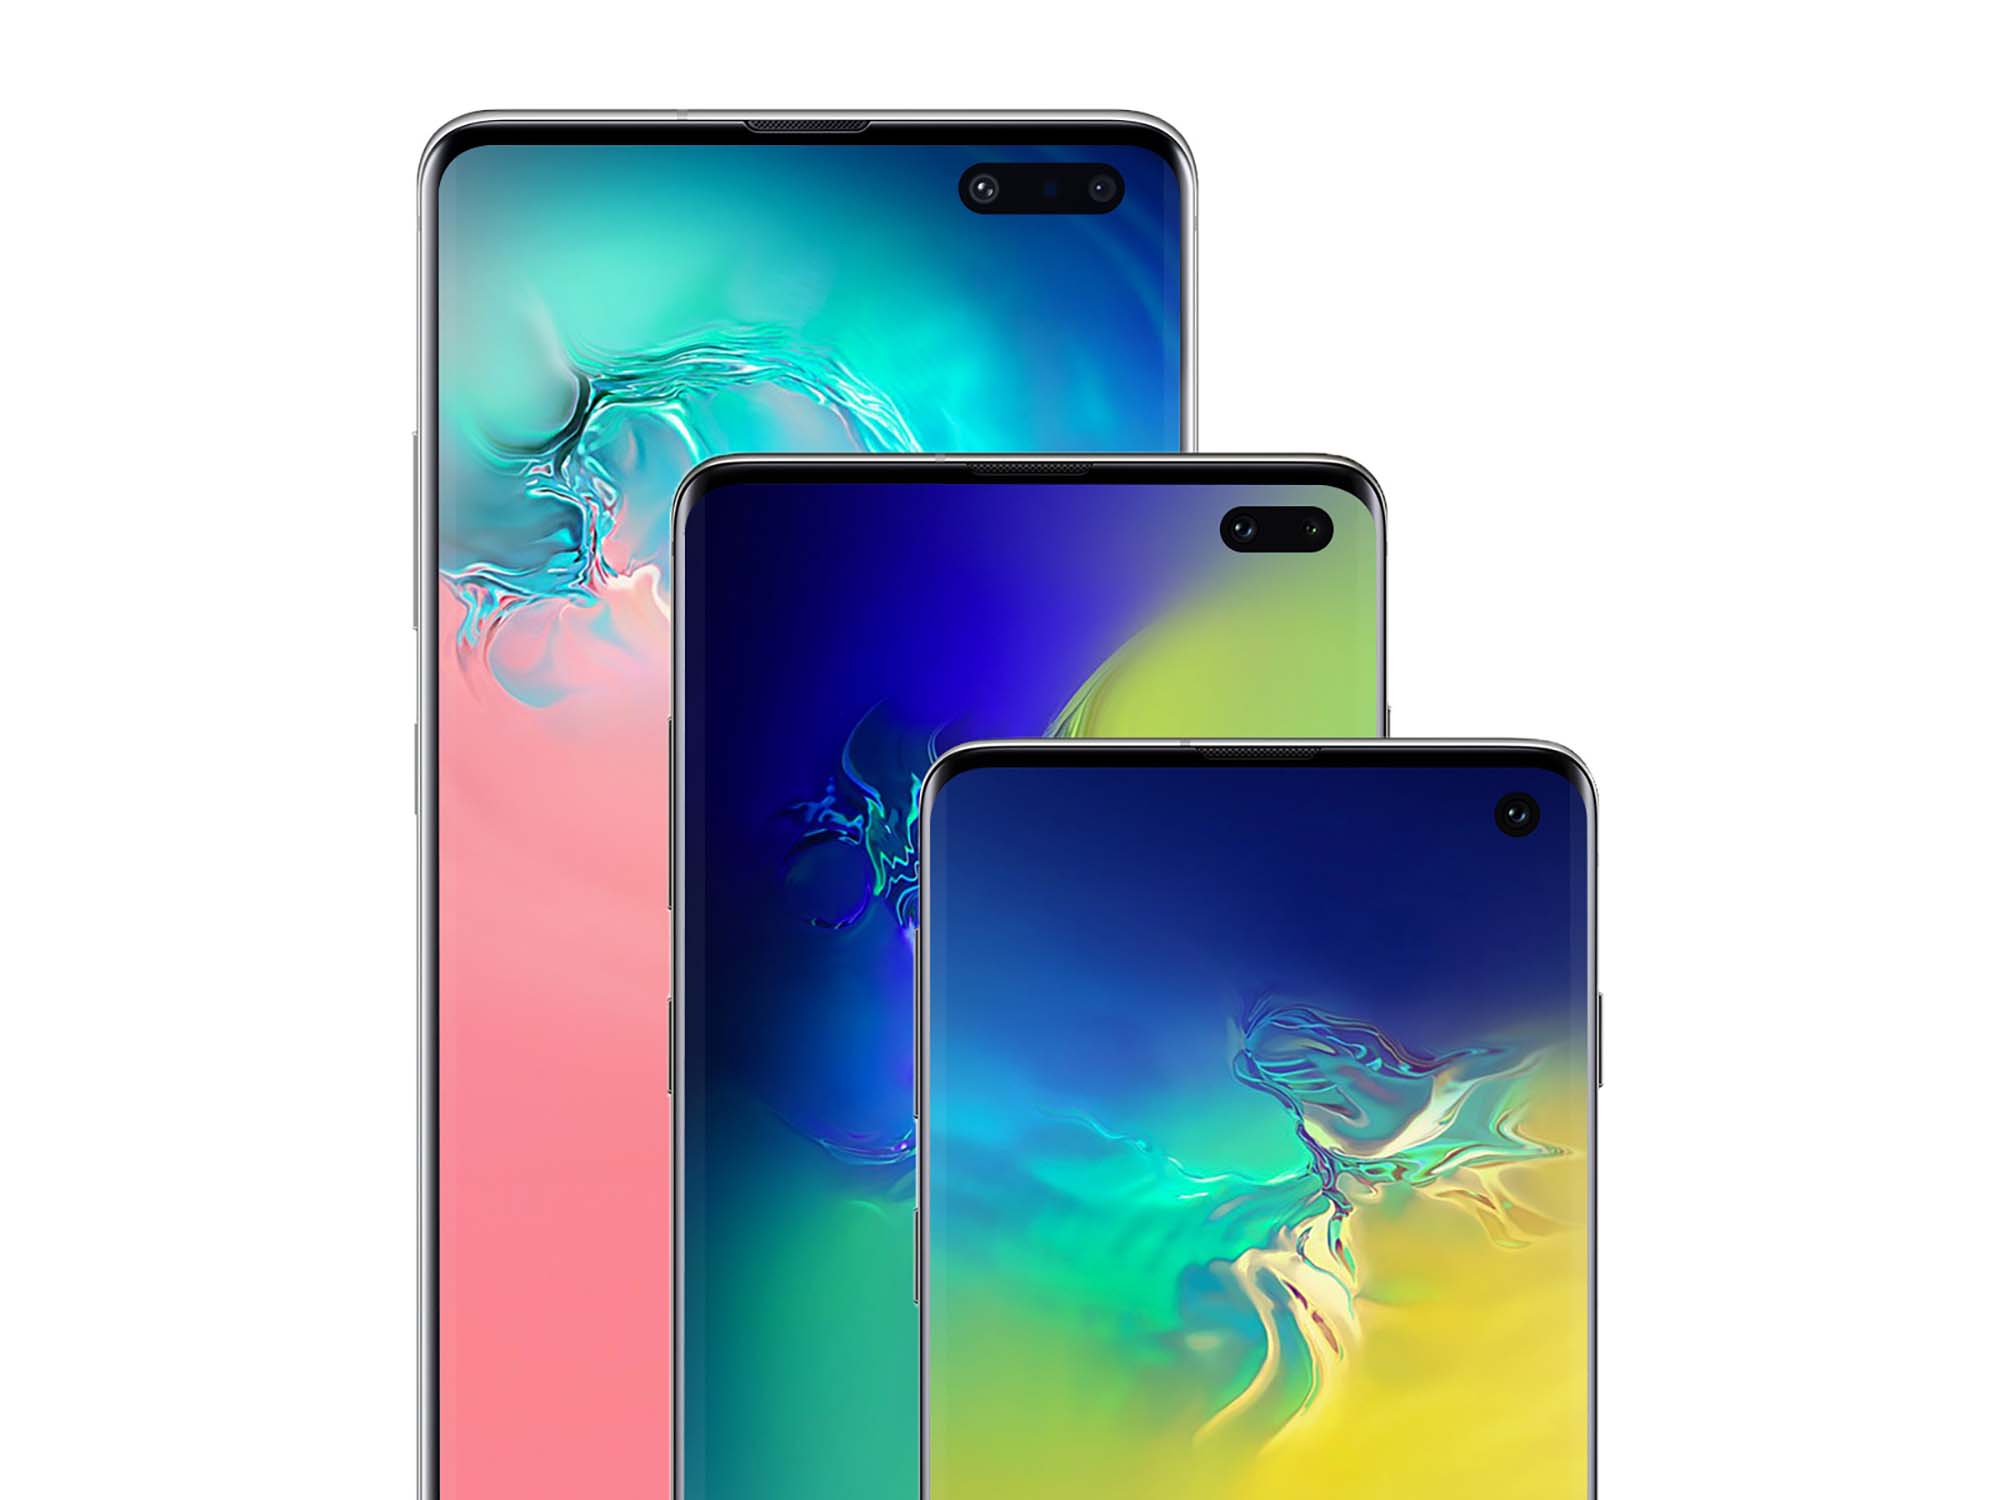 Top Samsung Galaxy S10, S10e and S10+ Mockups